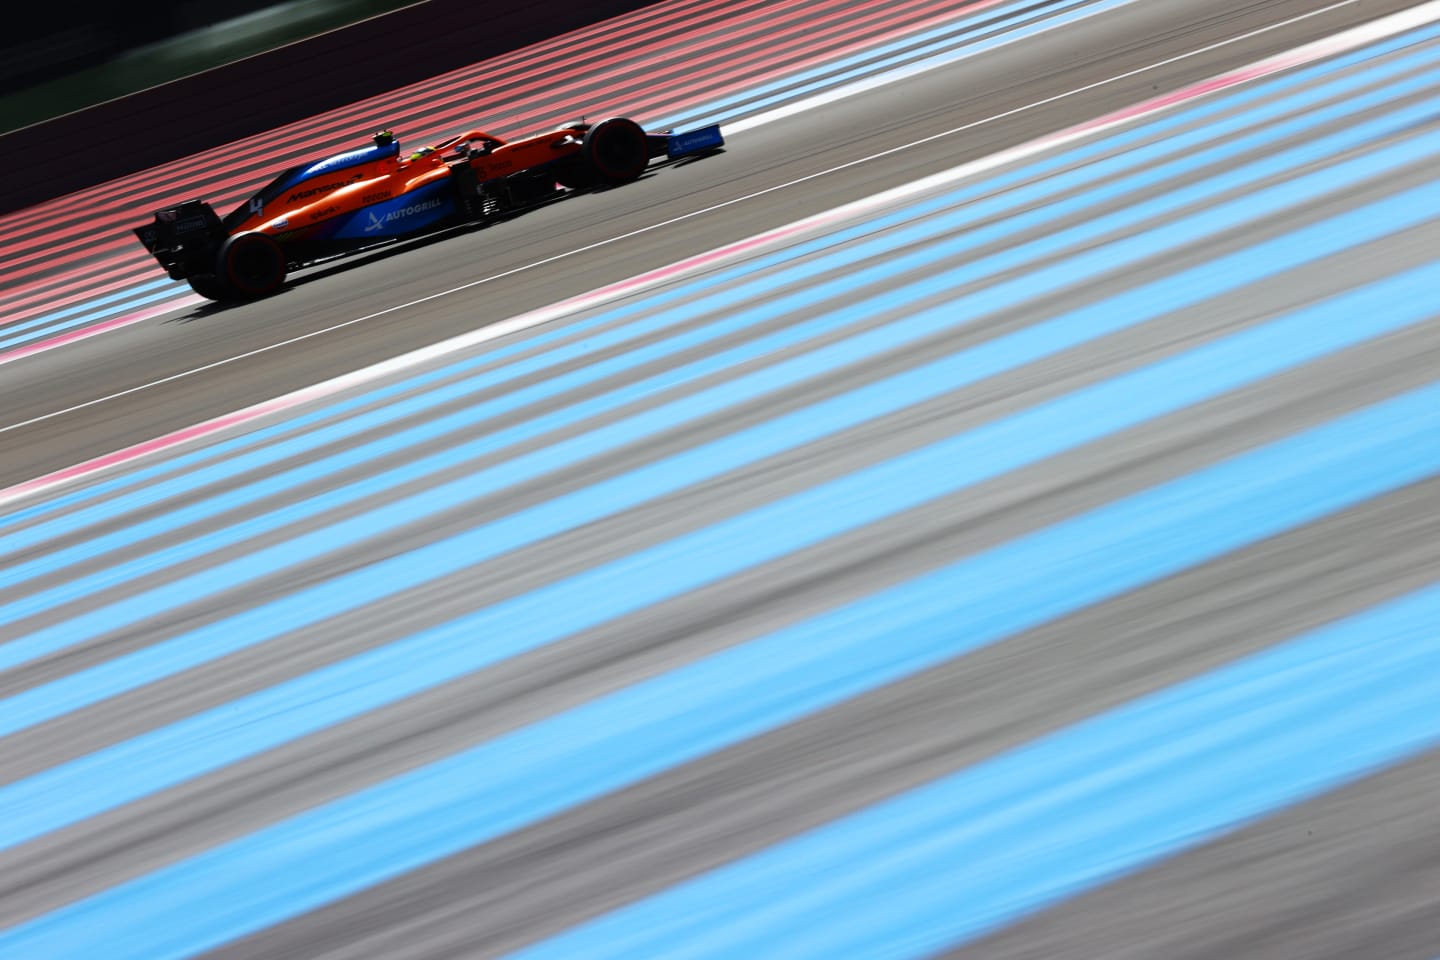 LE CASTELLET, FRANCE - JUNE 18: Lando Norris of Great Britain driving the (4) McLaren F1 Team MCL35M Mercedes during practice ahead of the F1 Grand Prix of France at Circuit Paul Ricard on June 18, 2021 in Le Castellet, France. (Photo by Dan Istitene - Formula 1/Formula 1 via Getty Images)